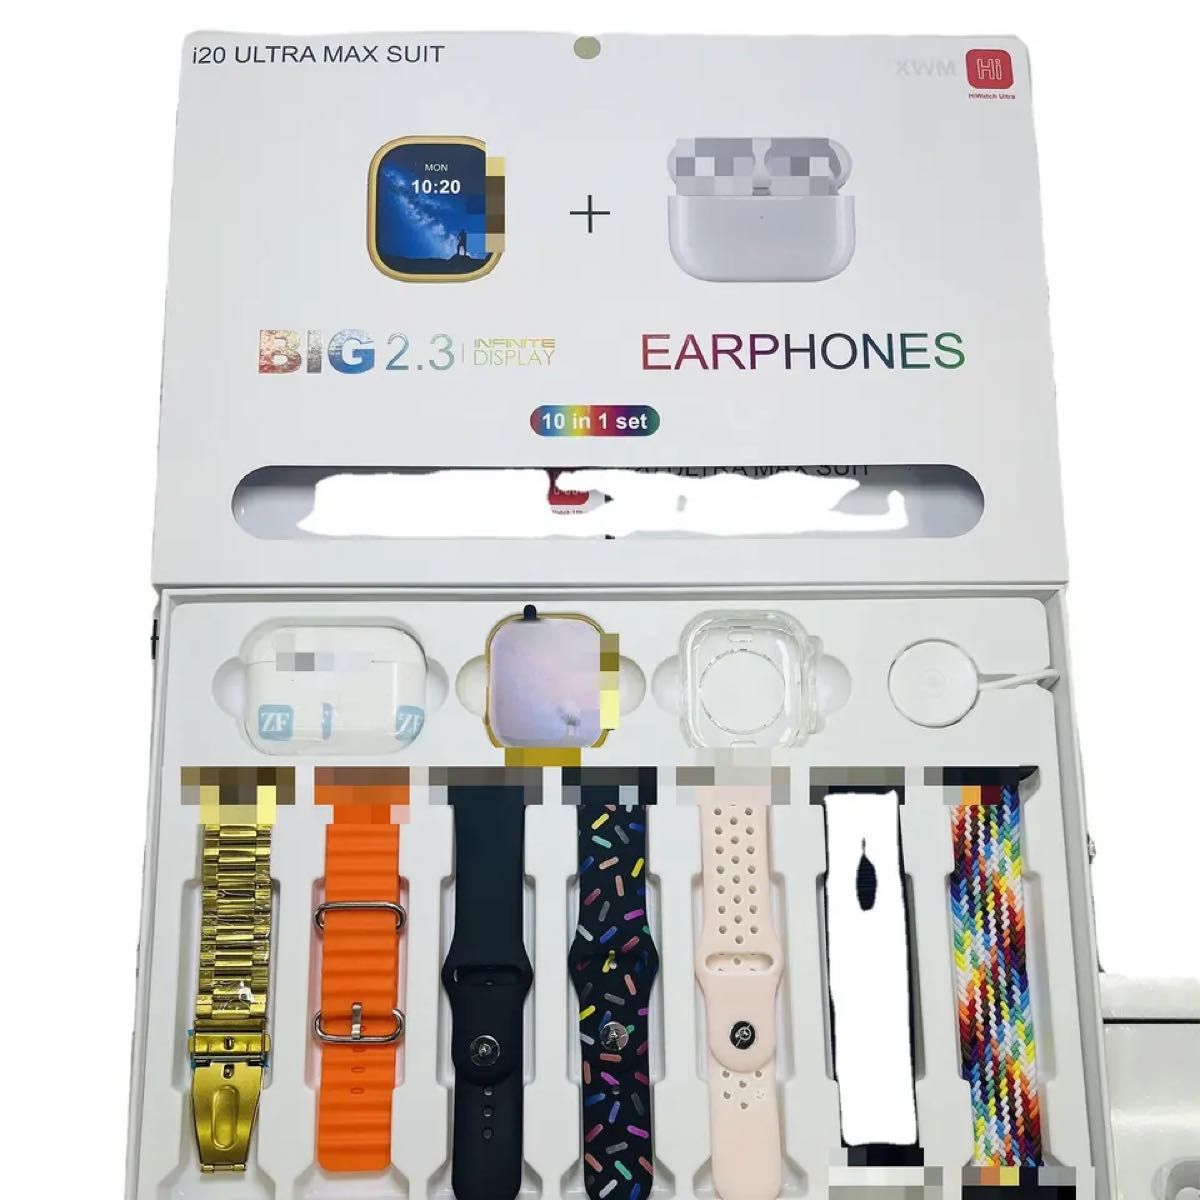 Smart watch with air buds 10 in 1 set